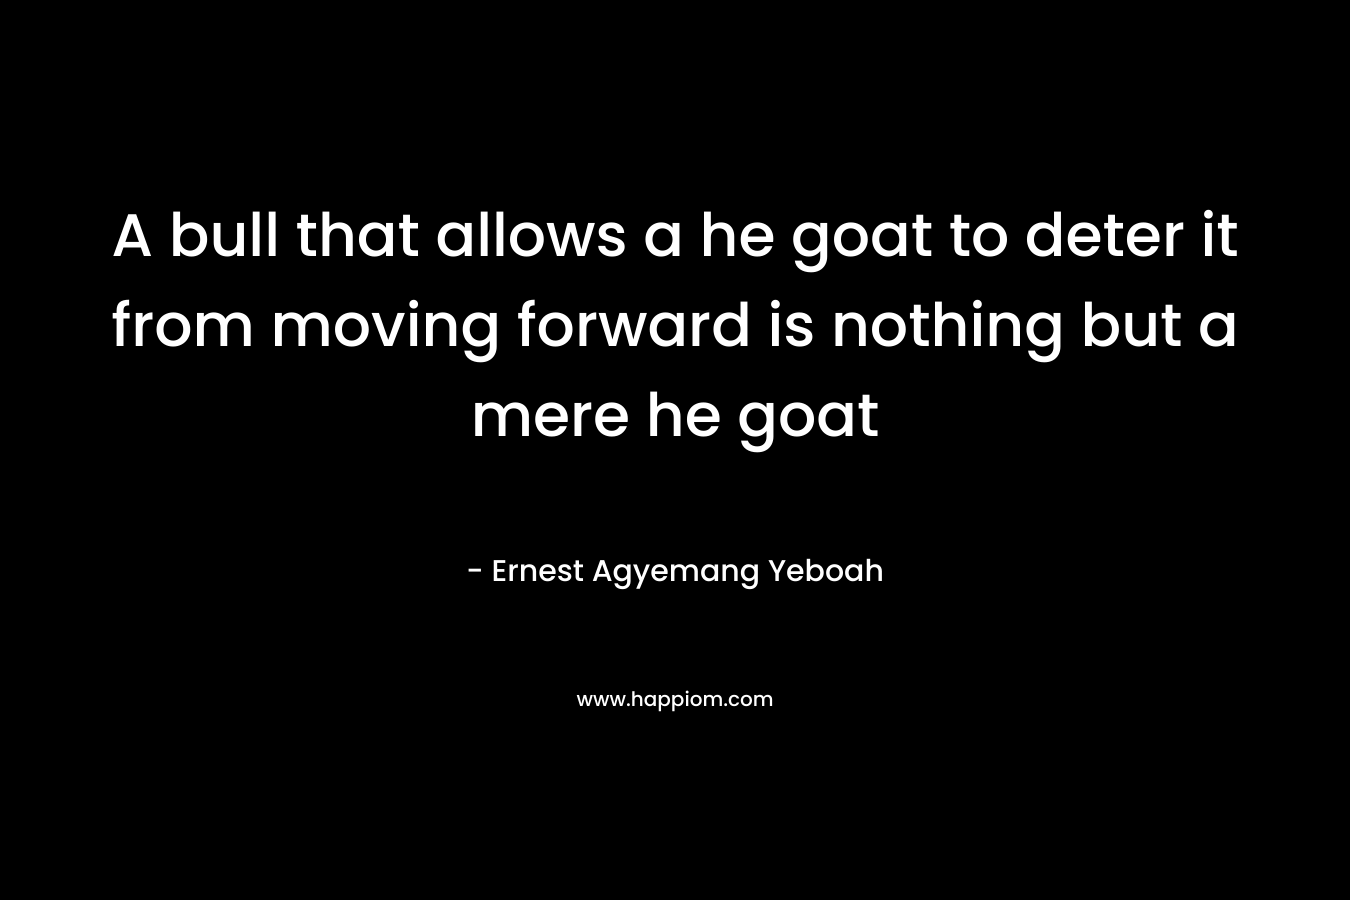 A bull that allows a he goat to deter it from moving forward is nothing but a mere he goat